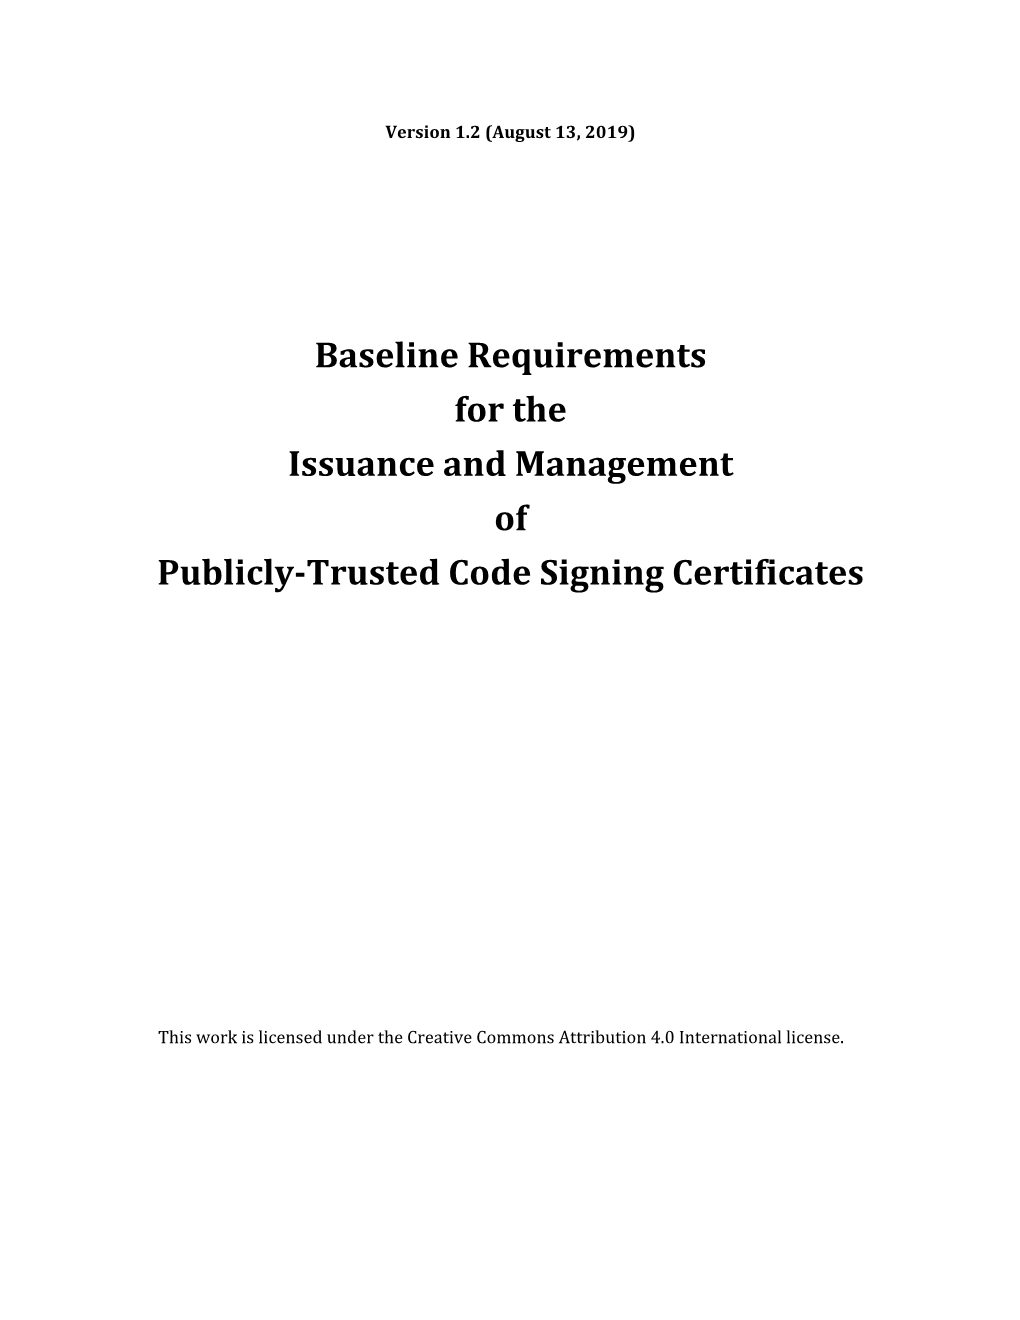 Baseline Requirements for the Issuance and Management of Publicly‐Trusted Code Signing Certificates